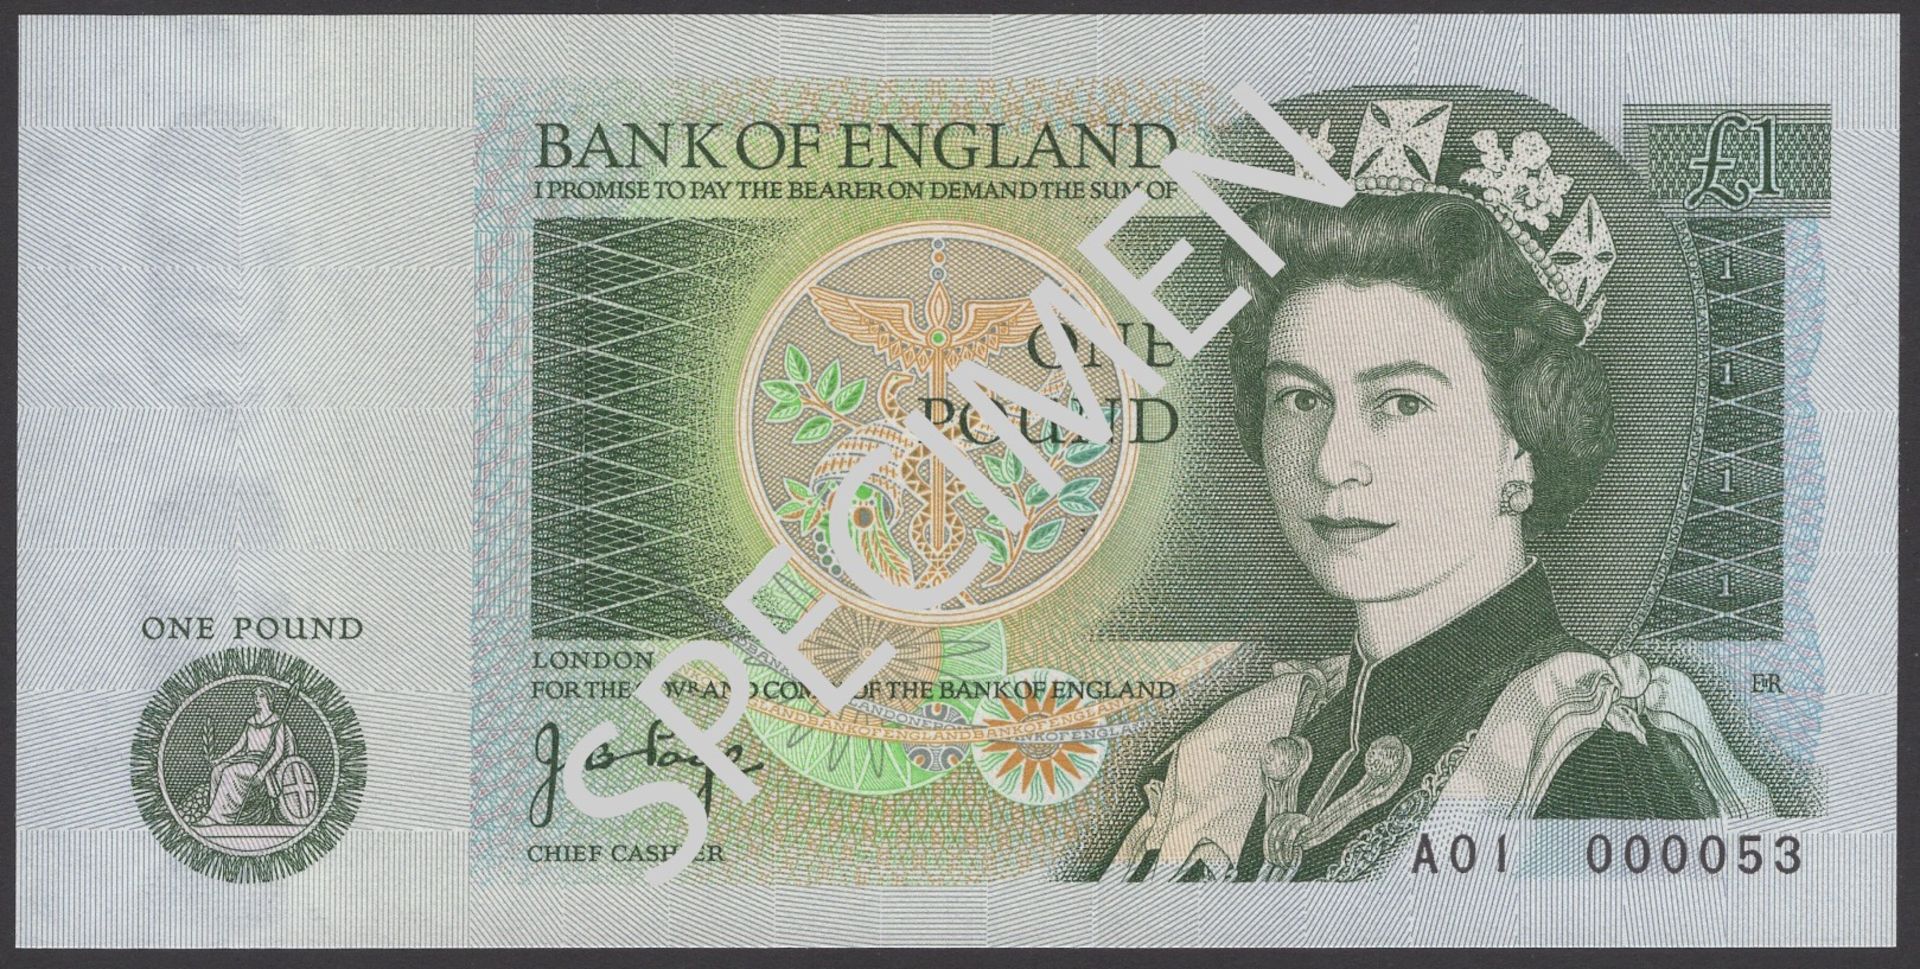 Bank of England, John B. Page, Â£1, 9 February 1978, serial number A01 000053, uncirculated a...